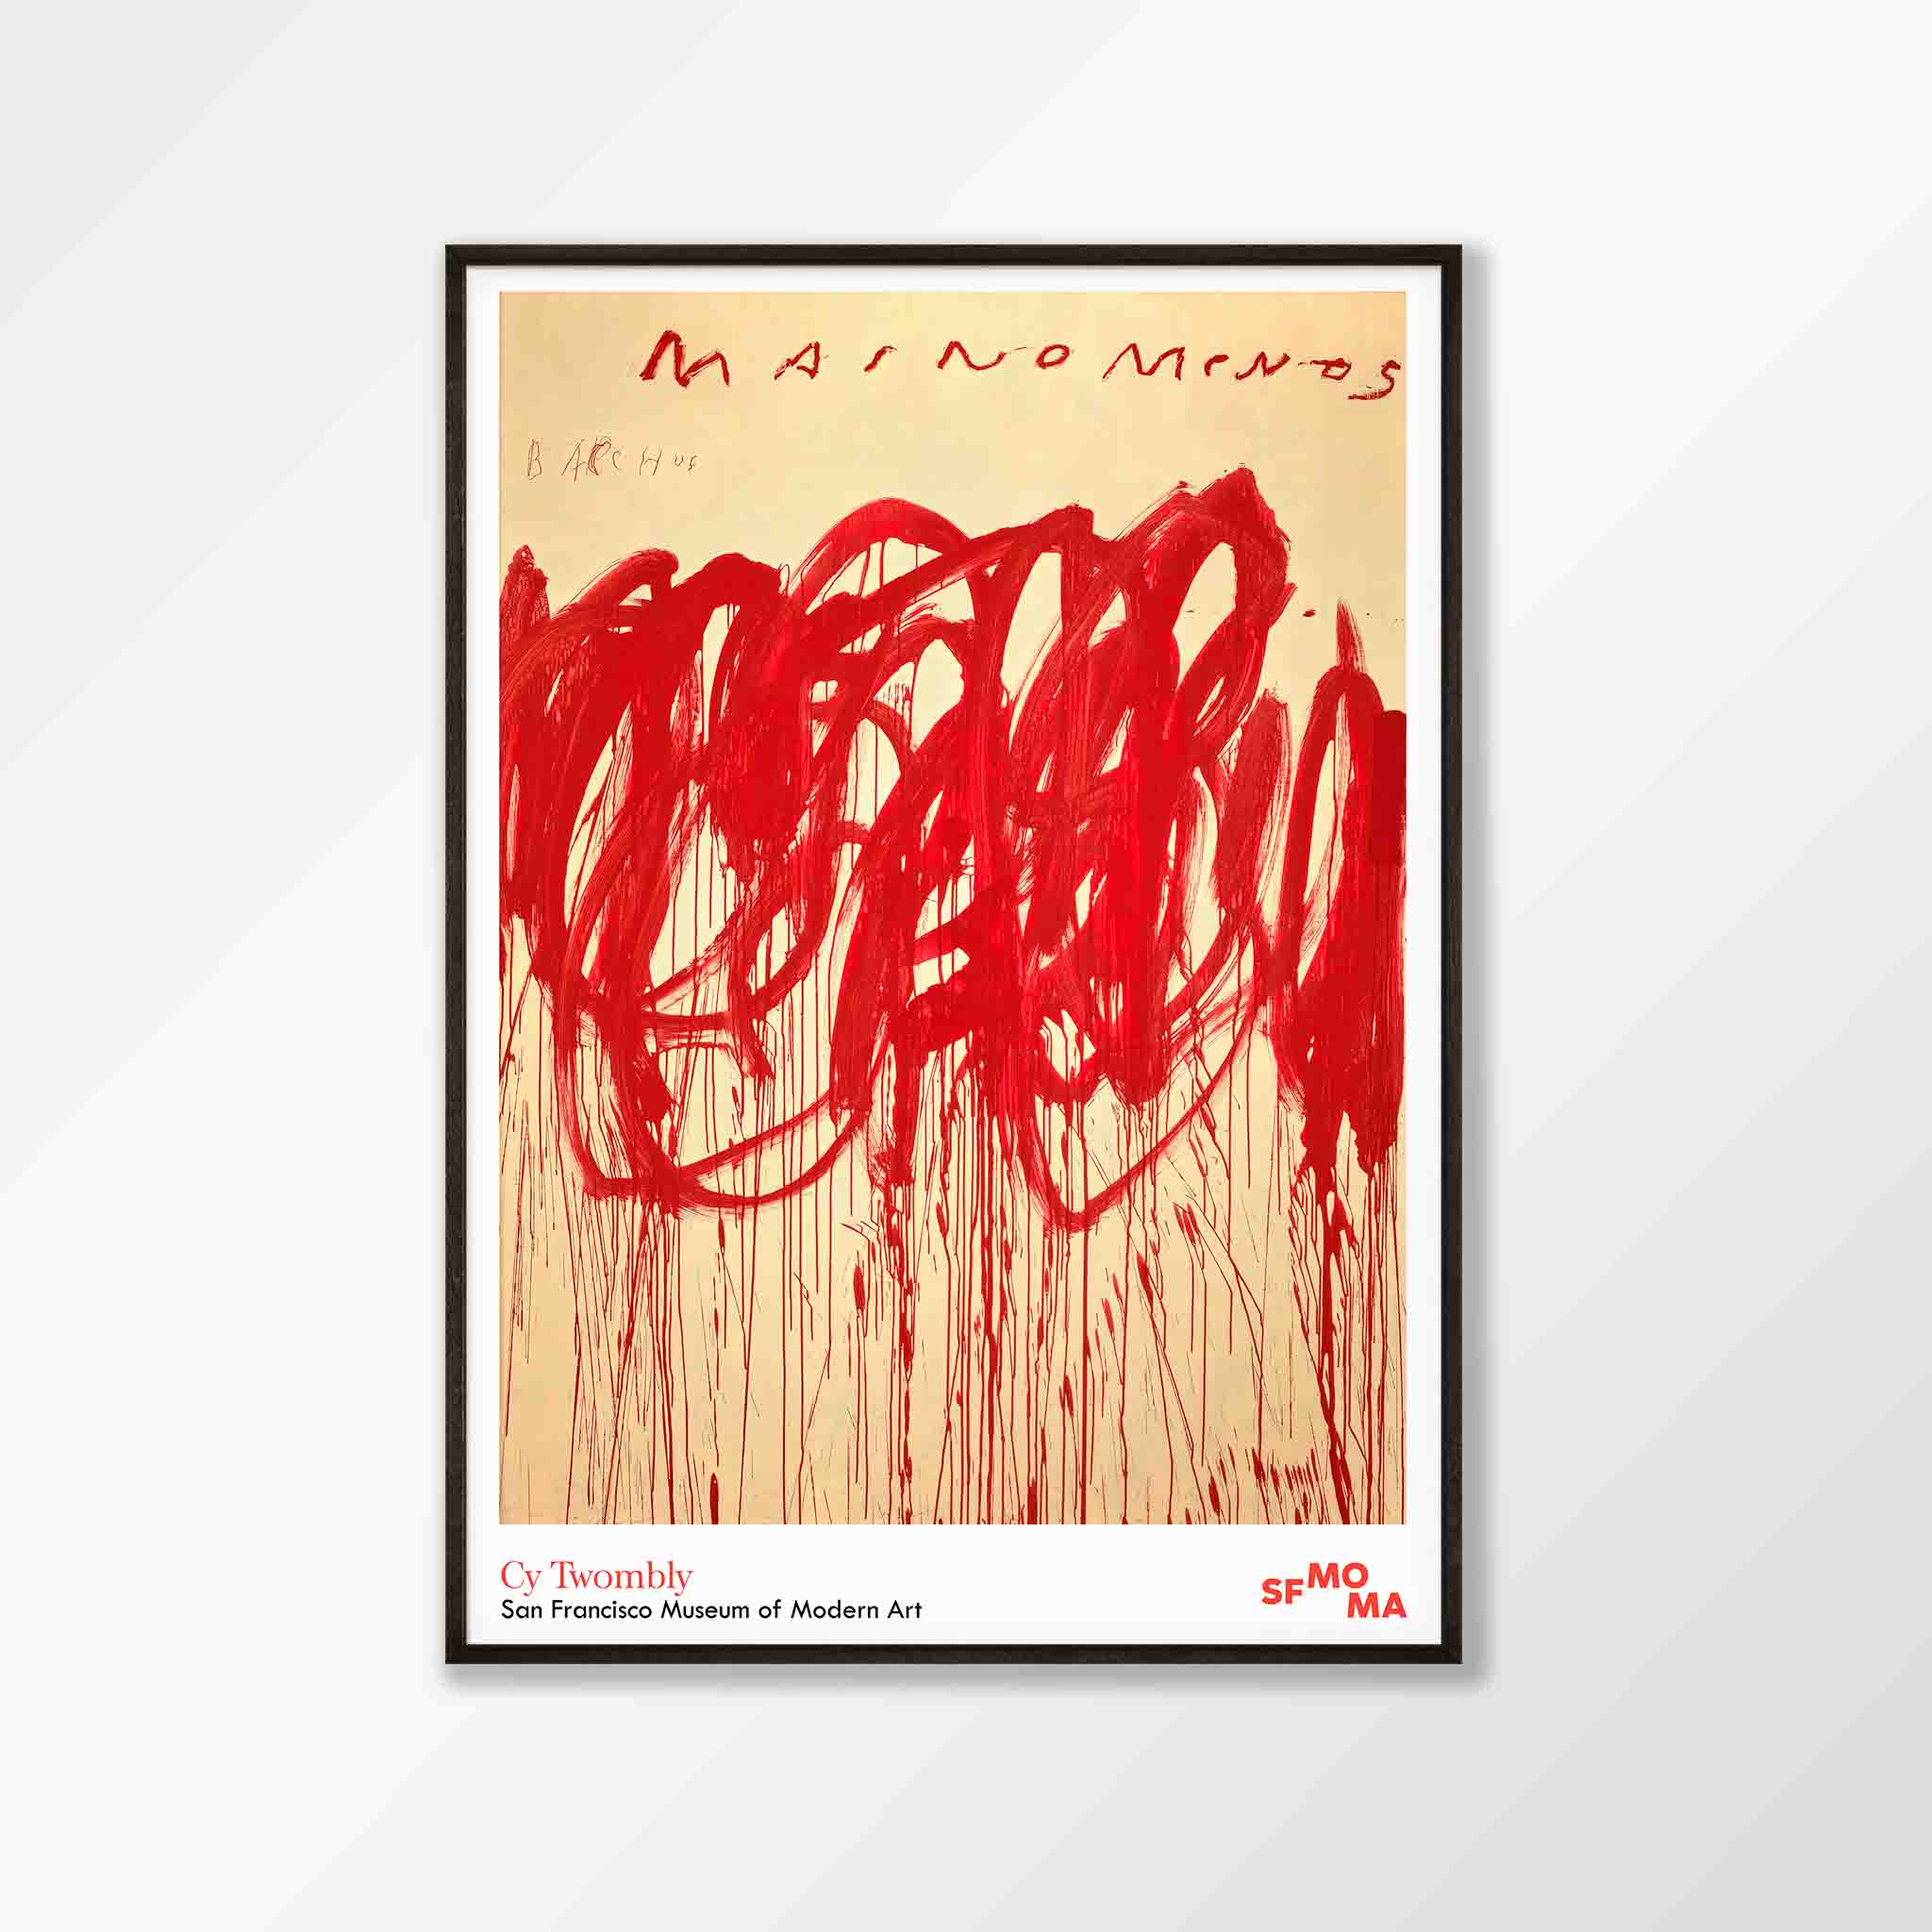 Cy Twombly 'Untitled' SF MOMA – atolloprintshop